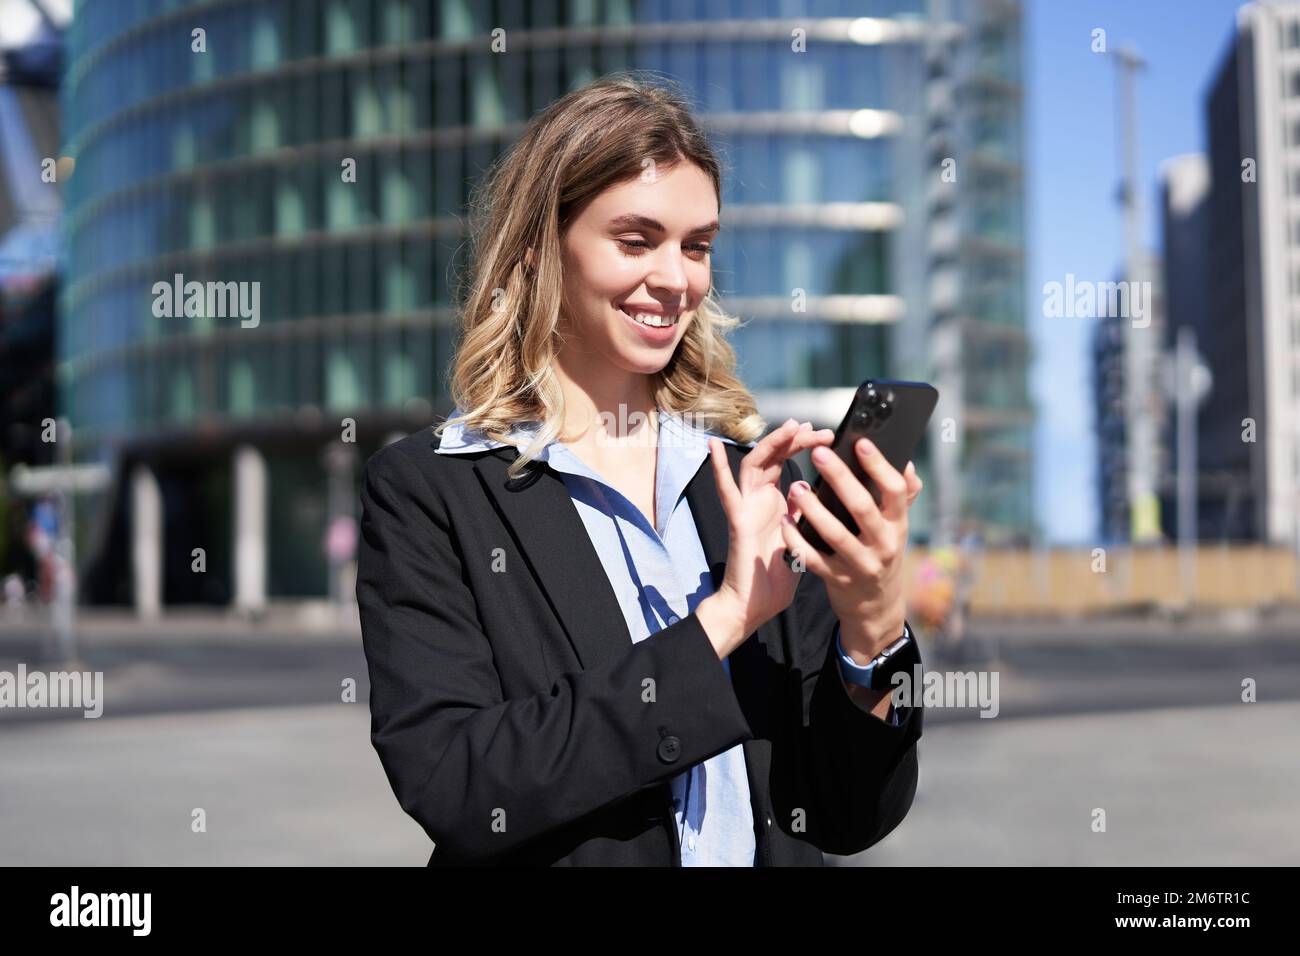 Portrait of confident corporate woman using mobile phone on city street. Businesswoman messaging on smartphone app while standin Stock Photo